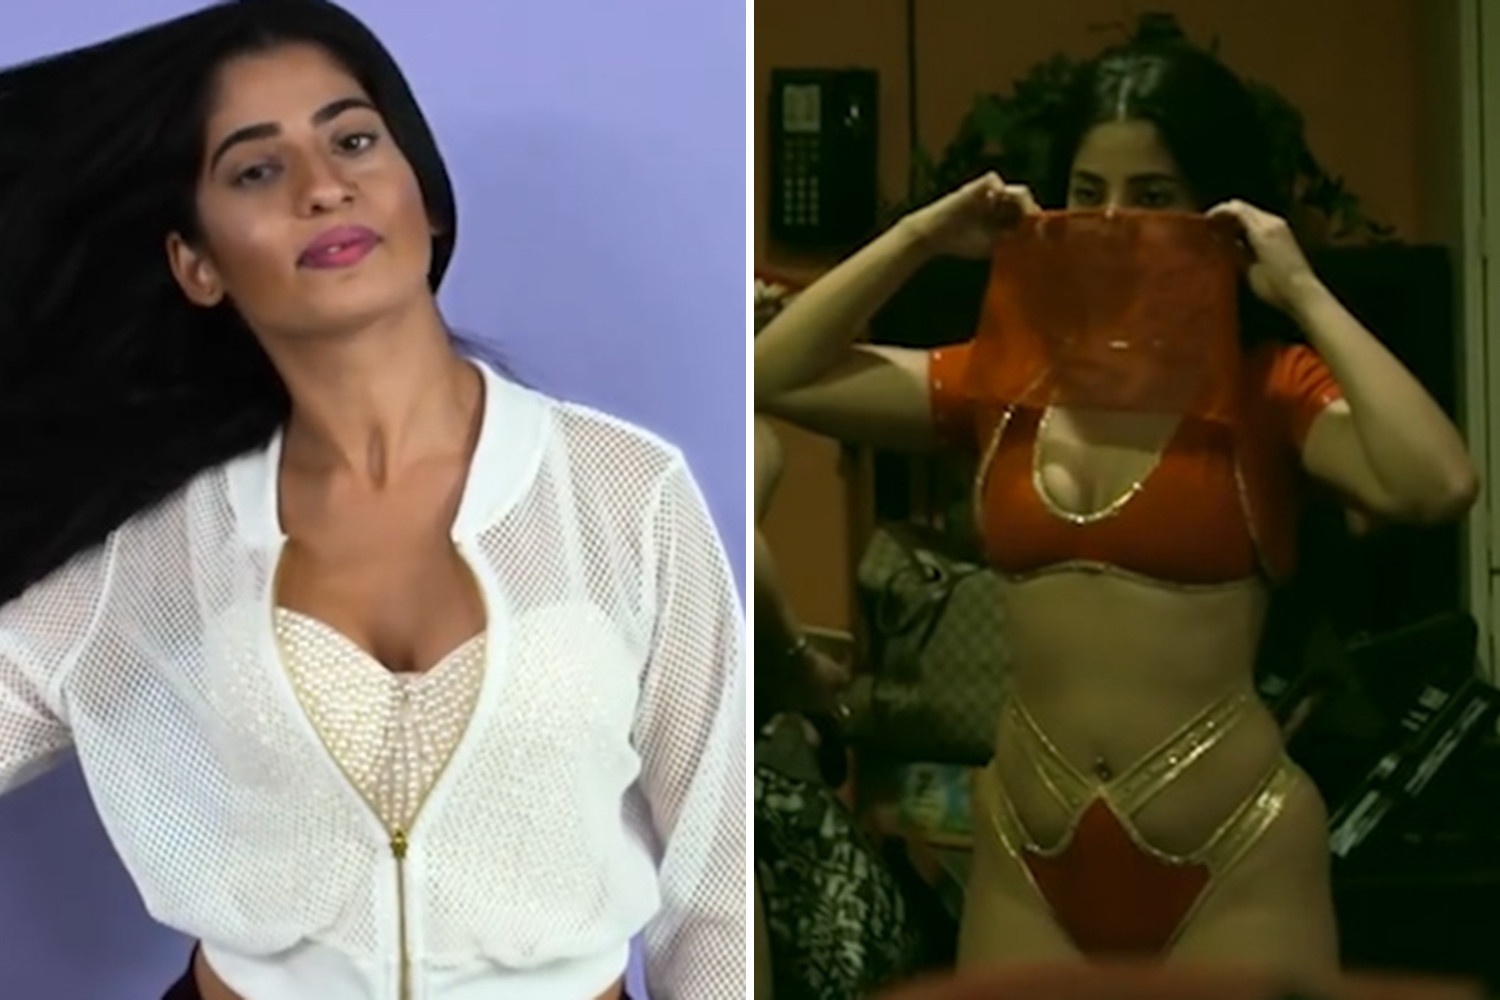 Muslim Porn Star Who Performs In Traditional Islamic Dress Reveals She Refuses To Quit Adult Films Despite Death Threats 1